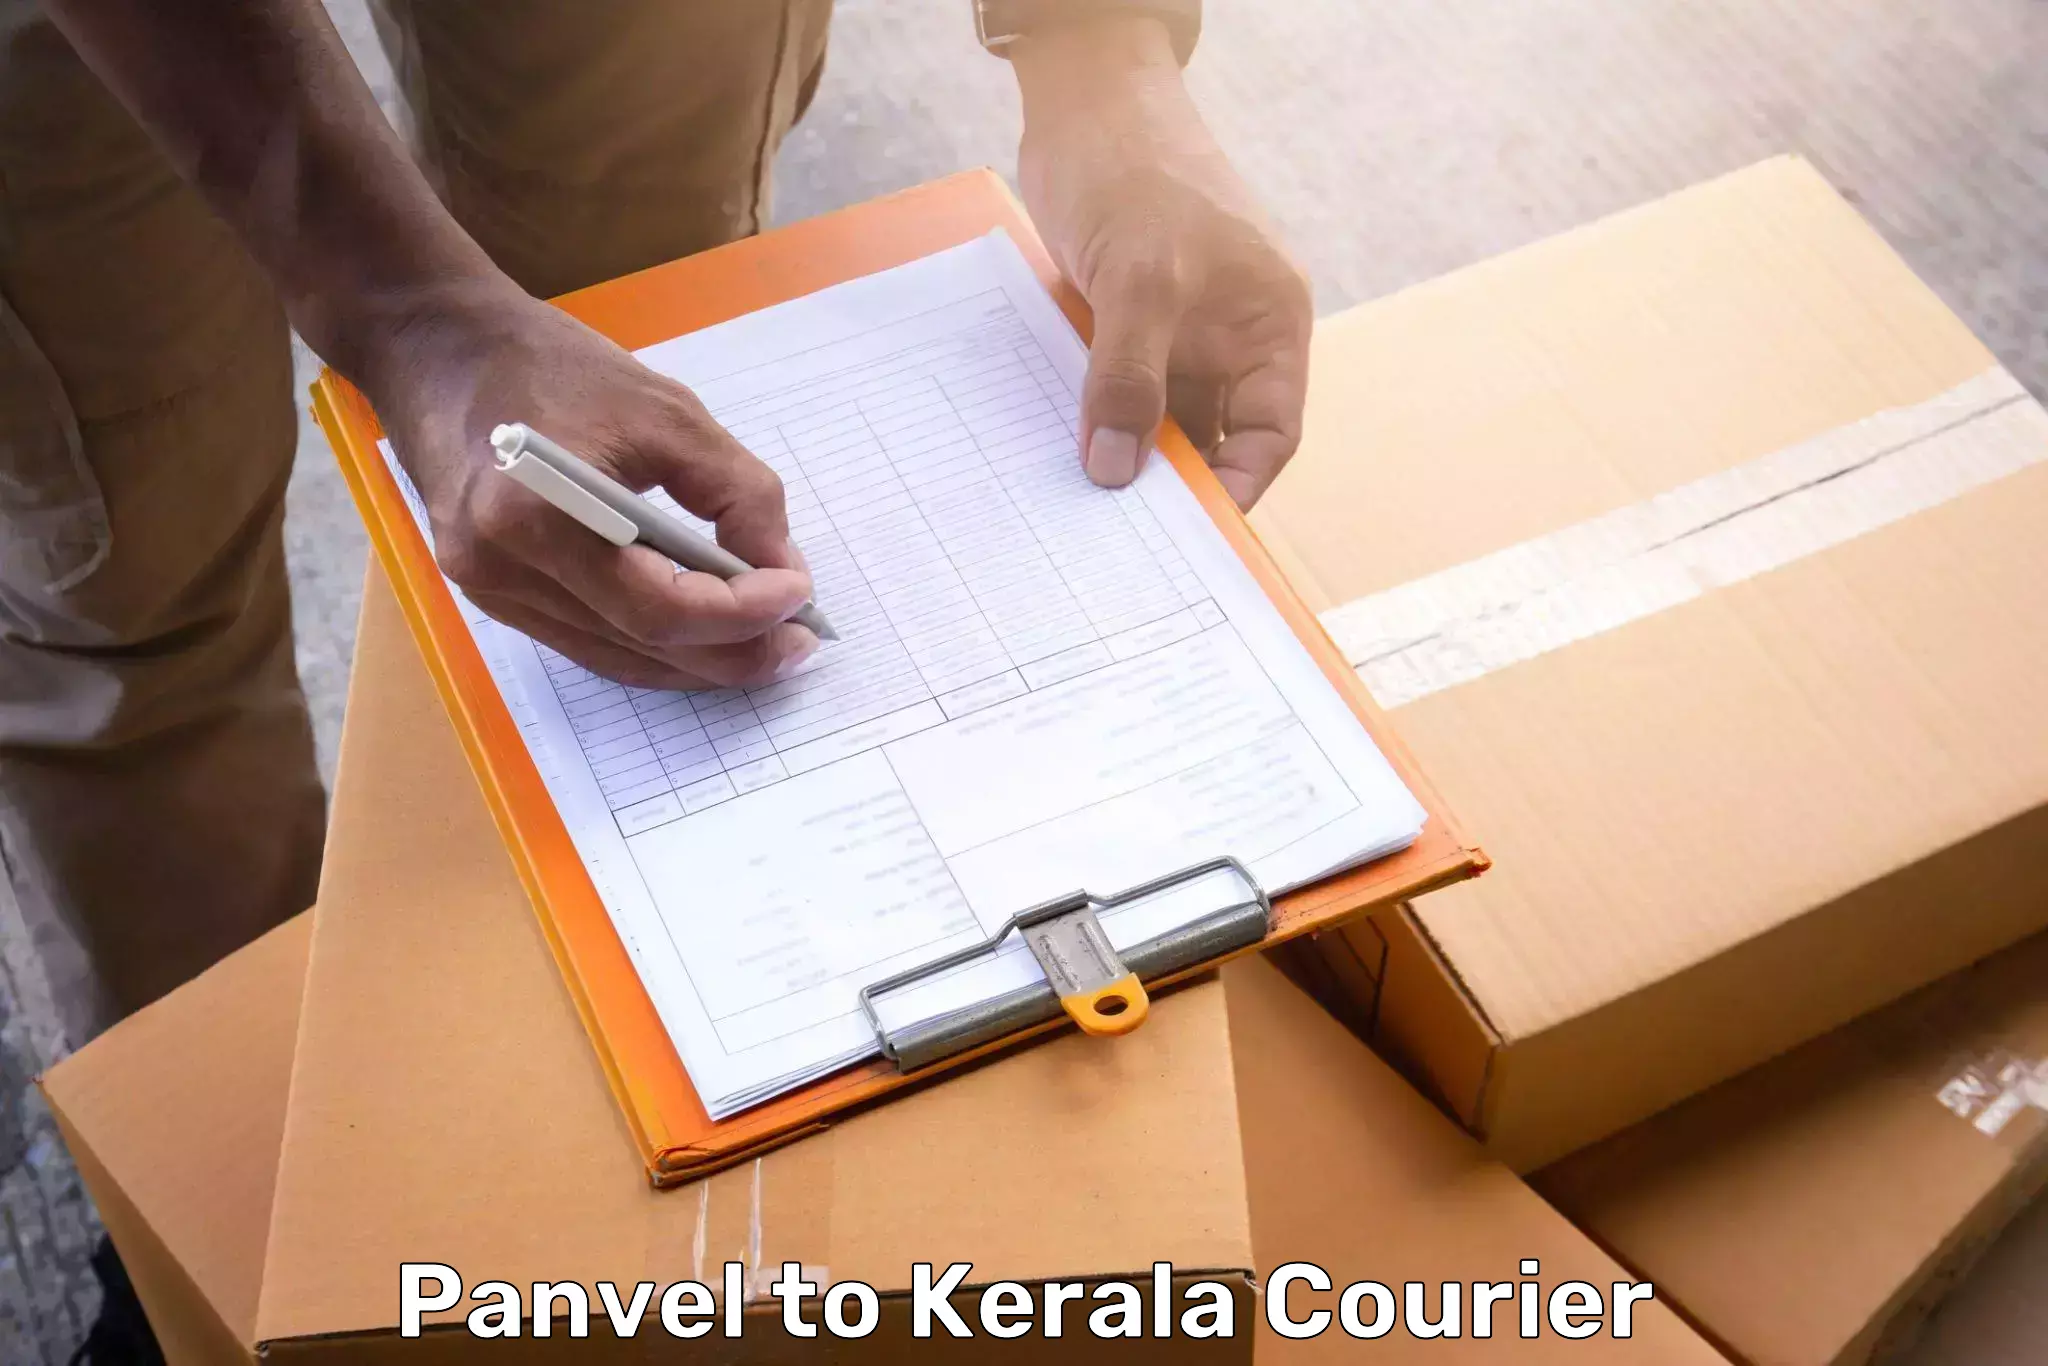 Doorstep luggage collection Panvel to Cochin Port Kochi